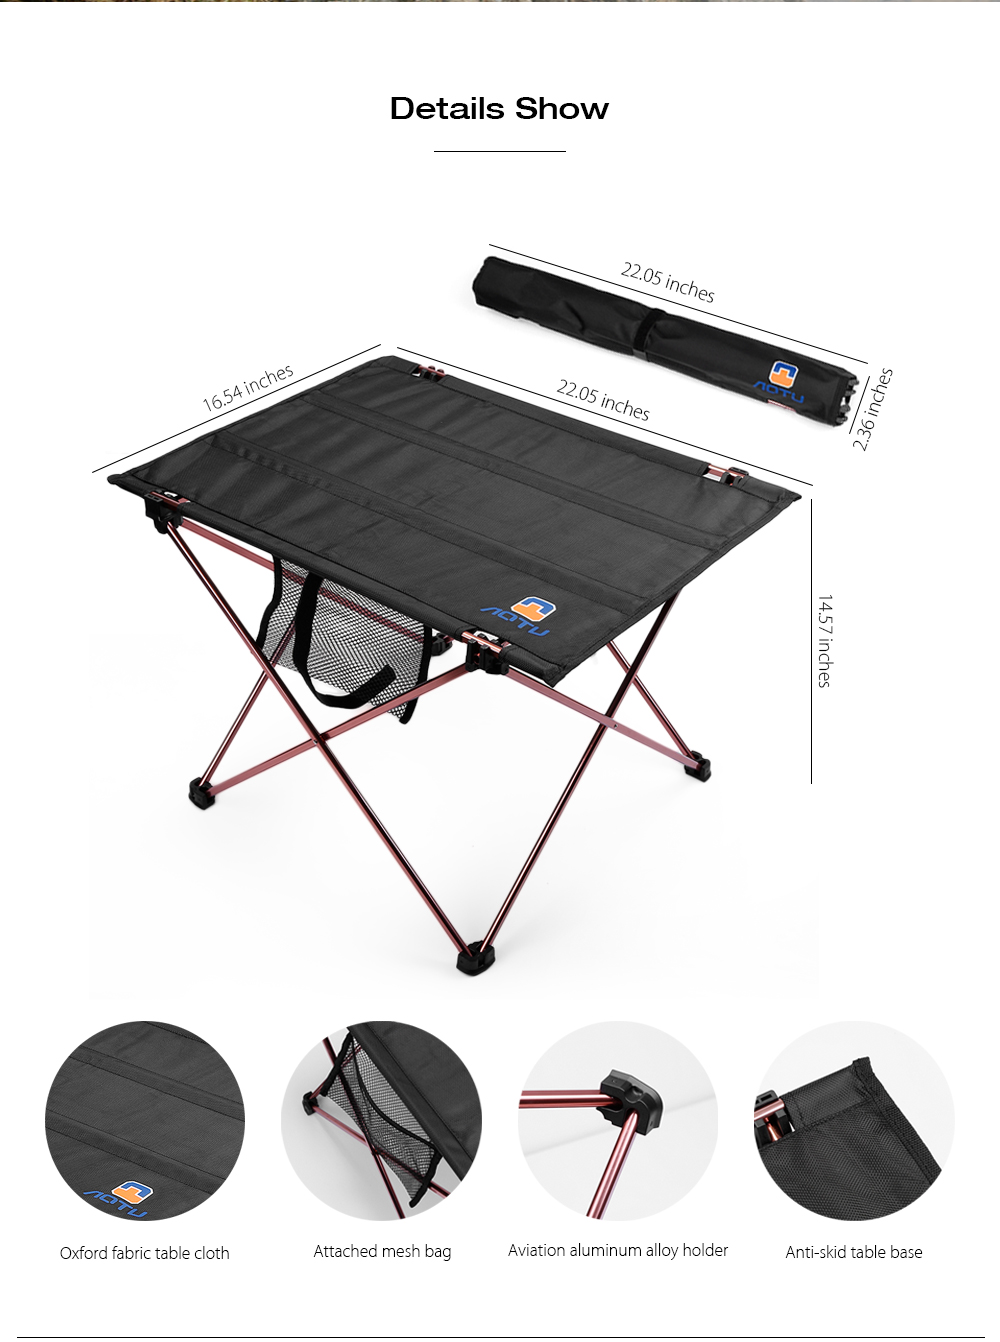 AOTU AT6728 Folding Aluminum Alloy Table with Anti-slip Cover Camping Kit